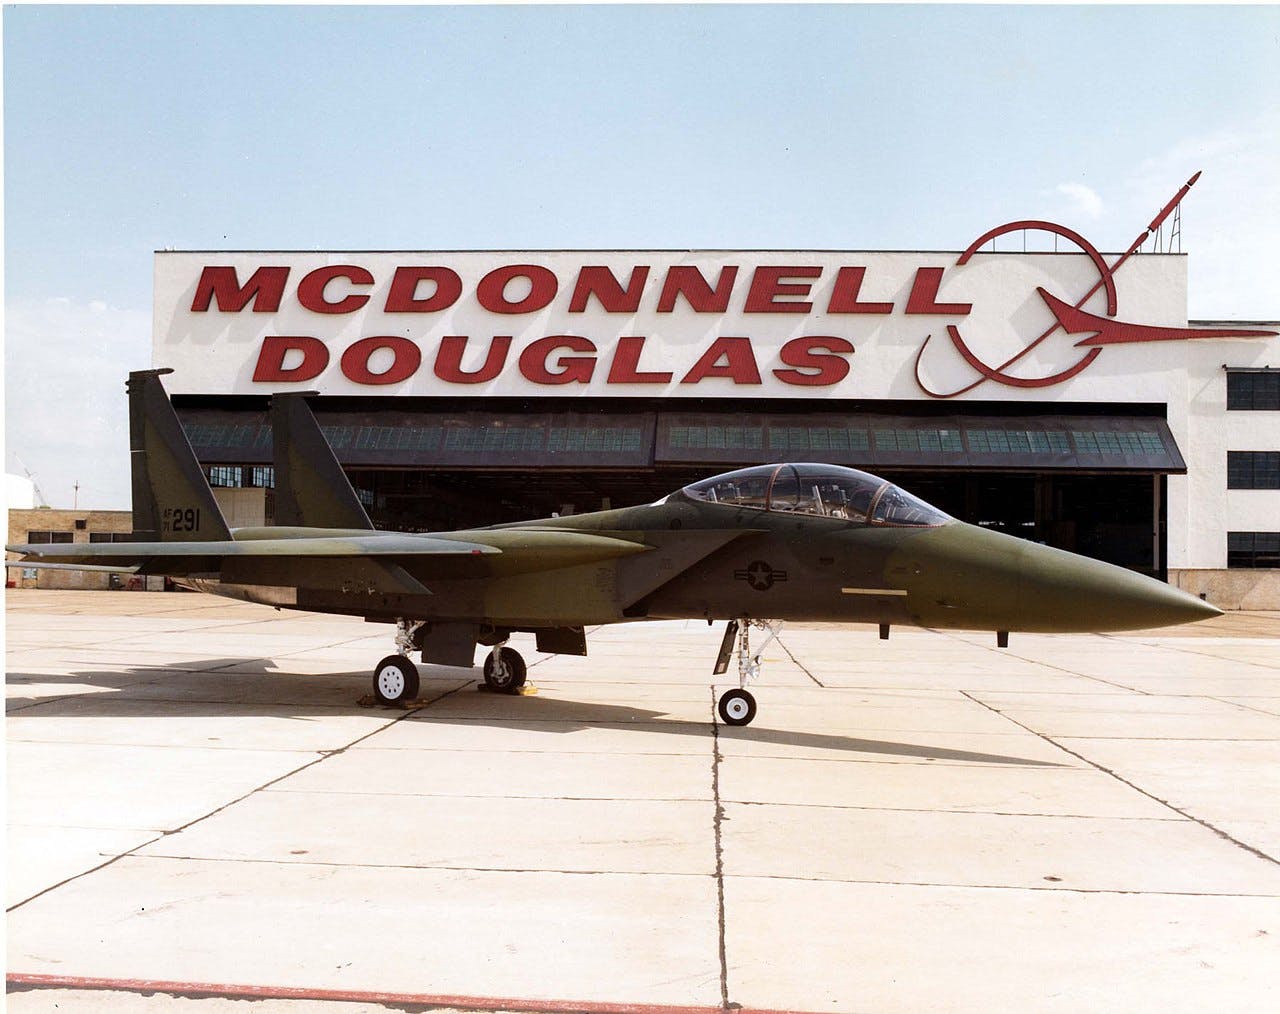 https%3A%2F%2Fs3-us-west-2.amazonaws.com%2Fthe-drive-cms-content-staging%2Fmessage-editor%252F1596404137993-1280px-mcdonnell_douglas_f-15e_prototype_060905-f-1234s-0241.jpg